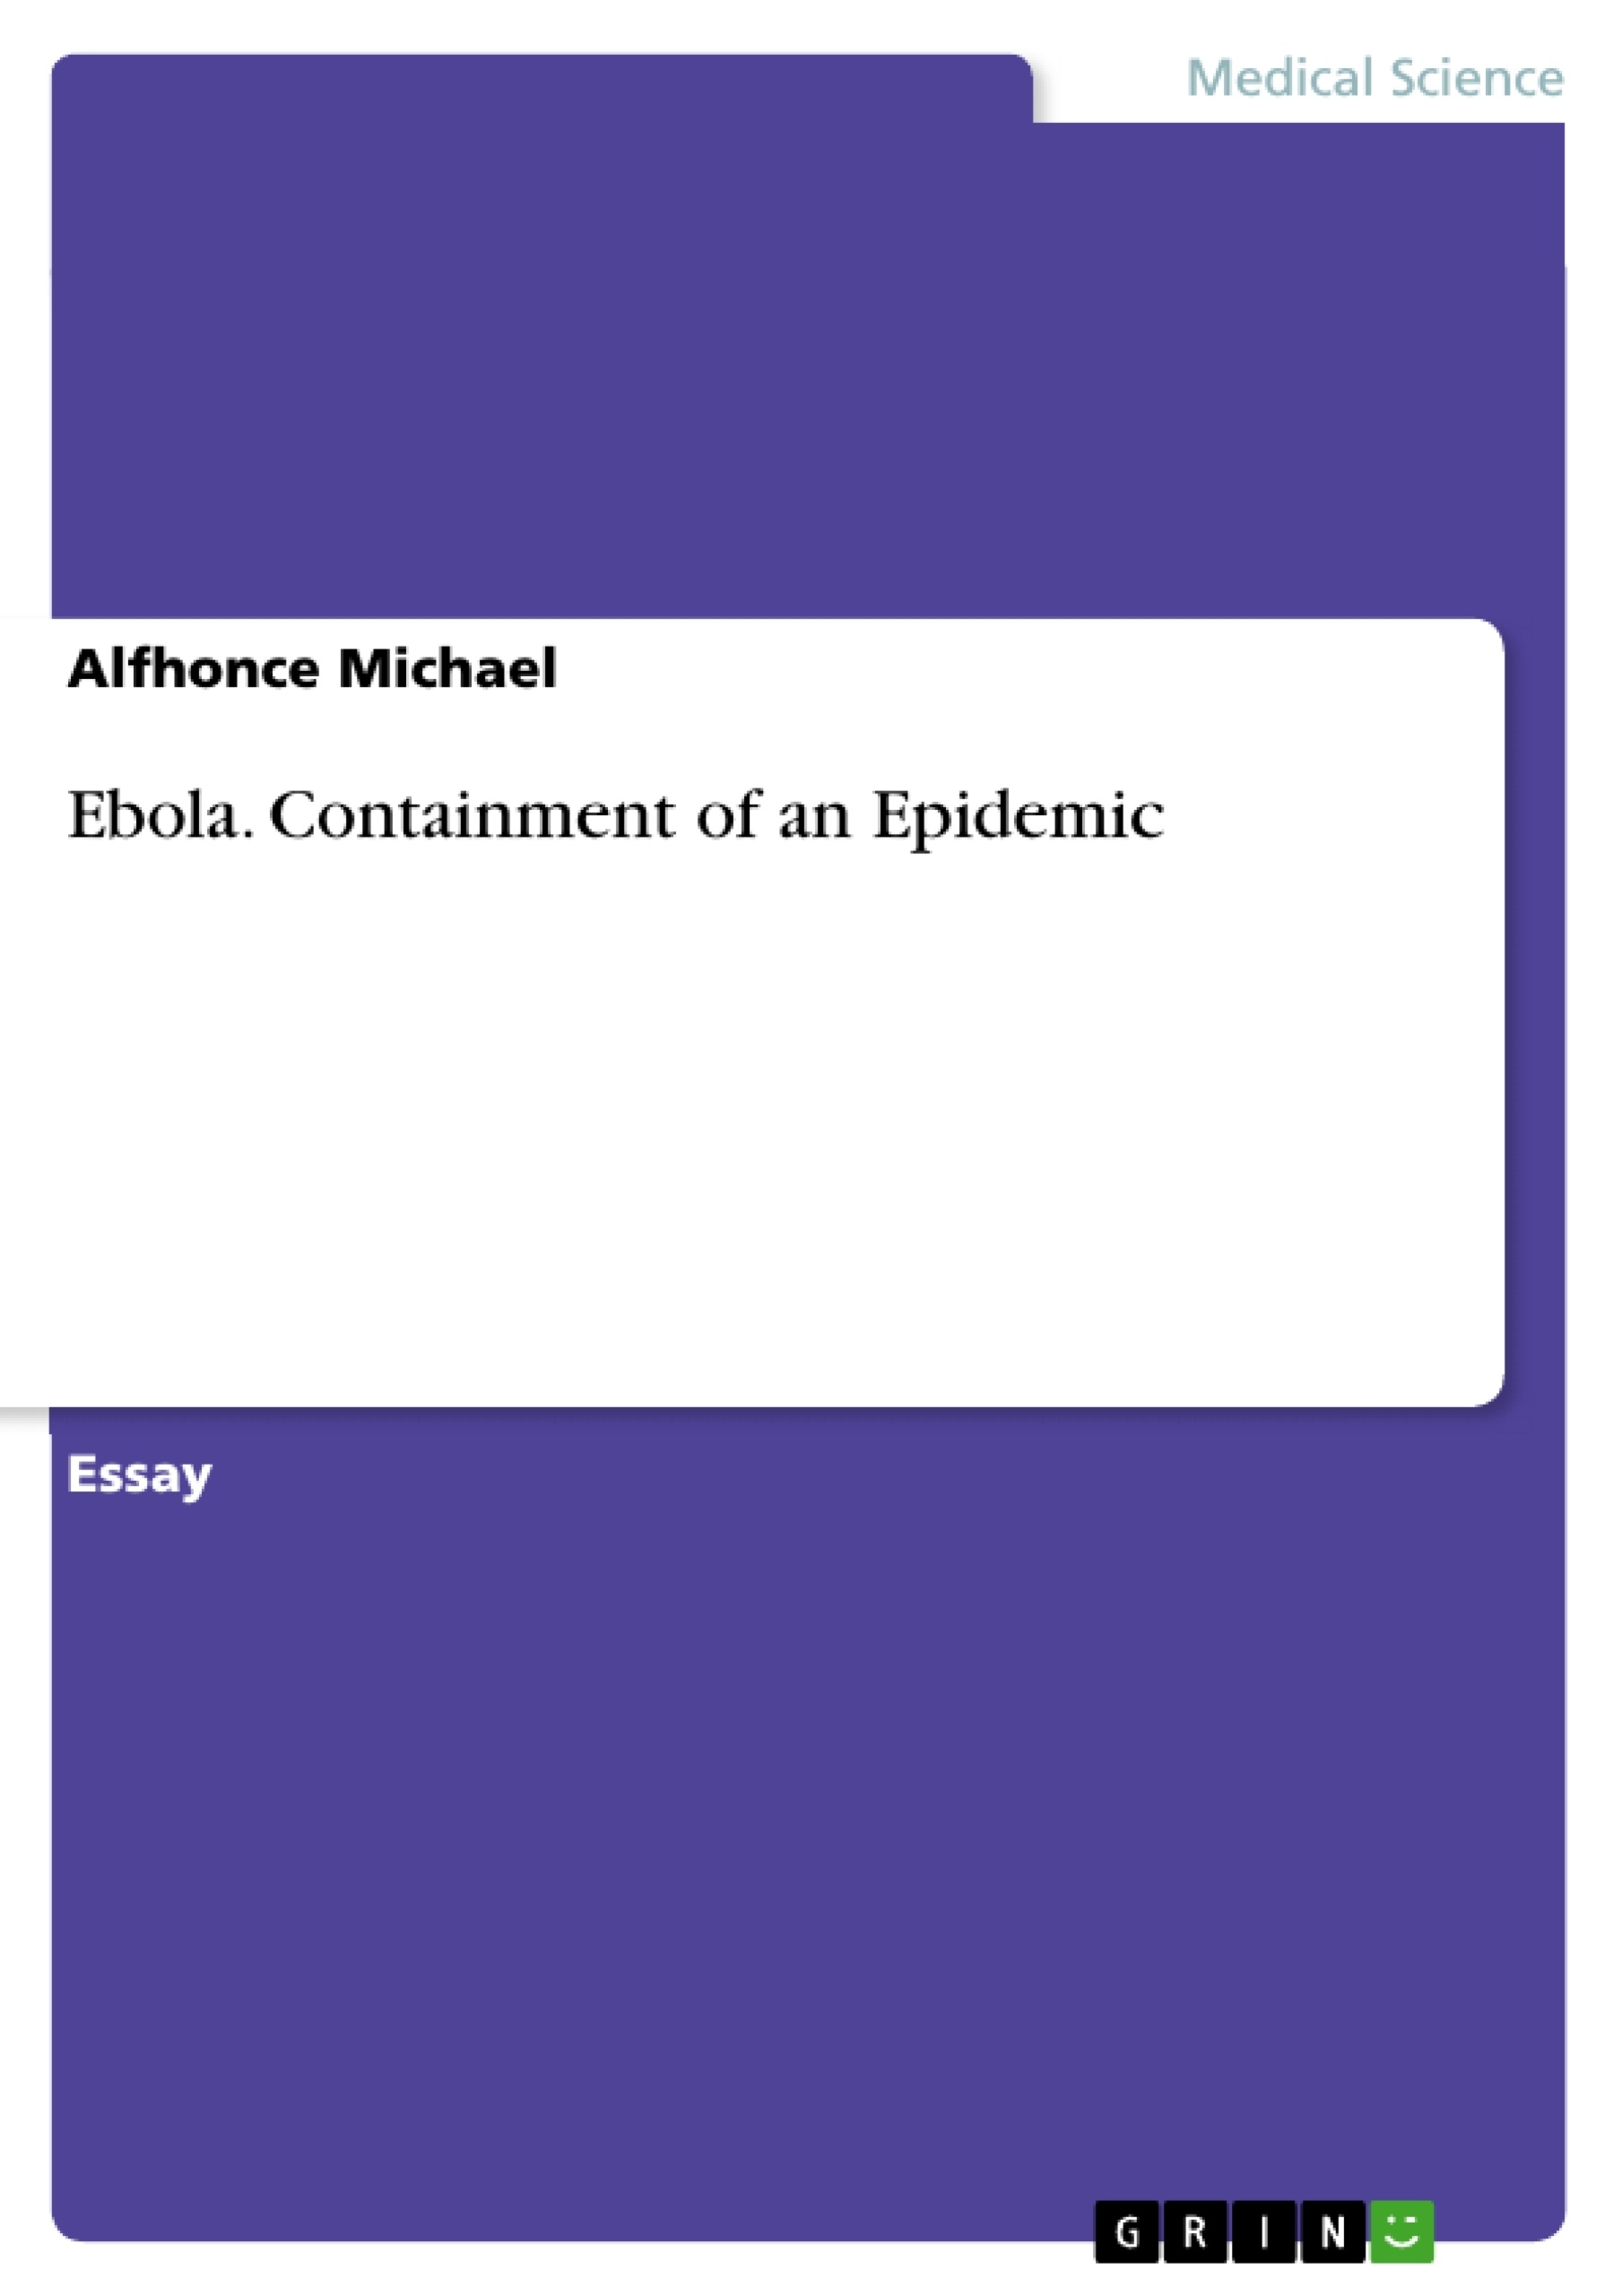 Titel: Ebola. Containment of an Epidemic